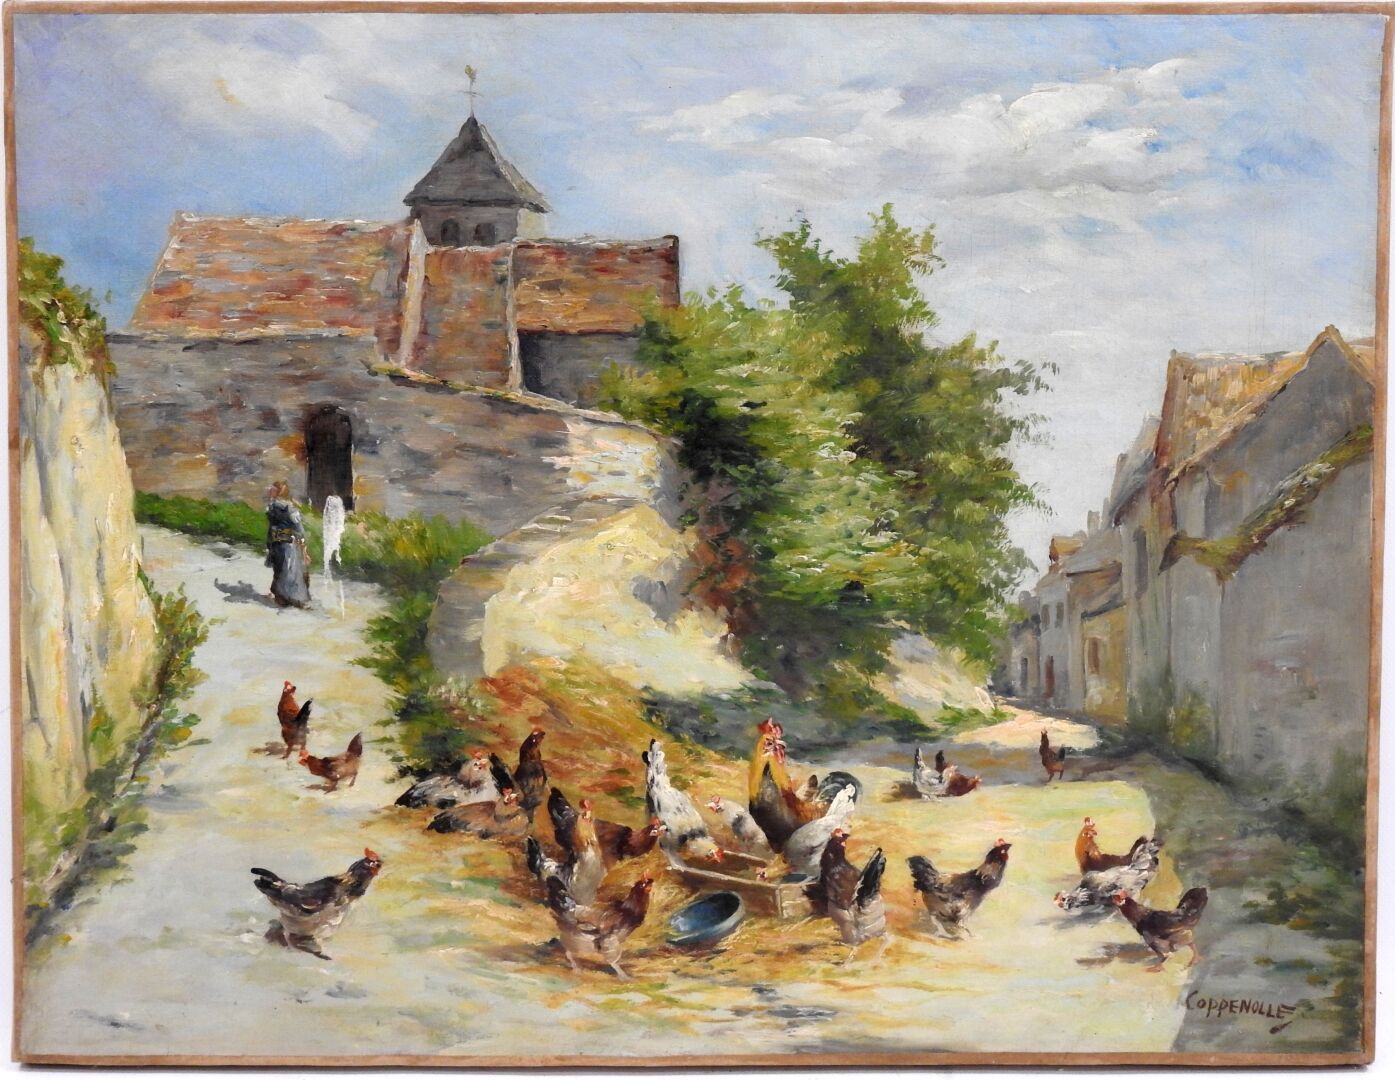 Null Edmond VAN COPPENOLLE (c.1843/46-1915)

Chickens and roosters feeding in th&hellip;